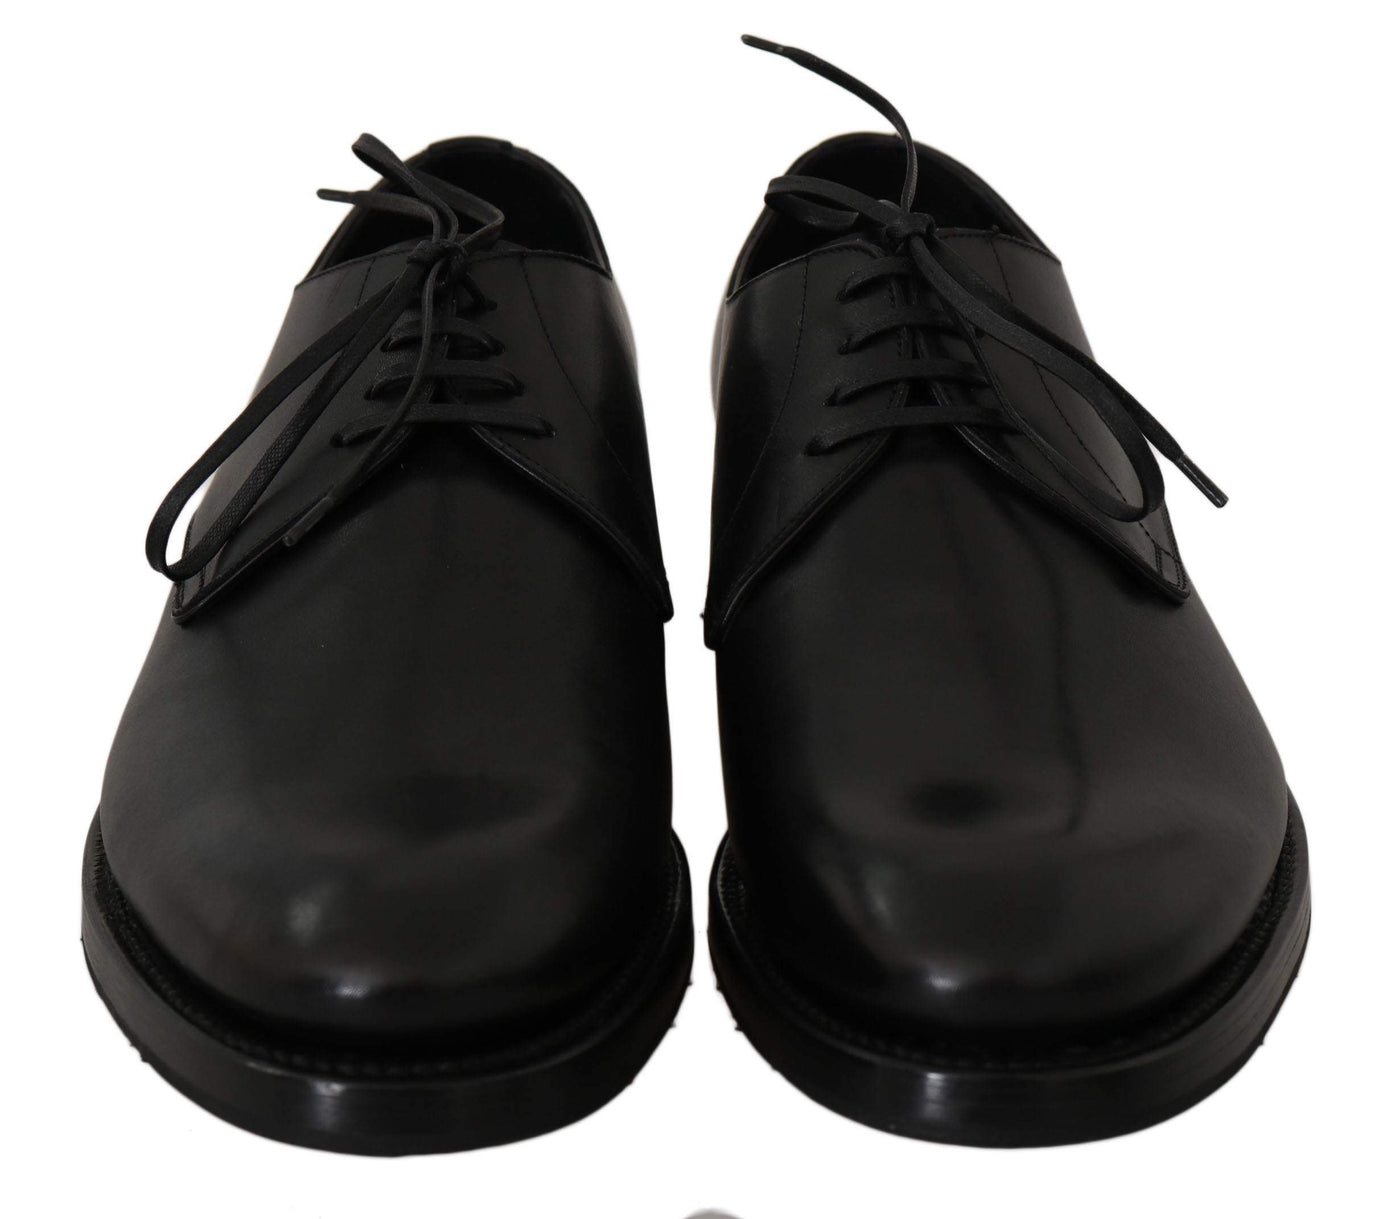 Dolce & Gabbana Black Leather Derby Formal Dress Shoes #men, Black, Brand_Dolce & Gabbana, Catch, Category_Shoes, Dolce & Gabbana, EU38.5/US8, EU39.5/US6.5, EU39/US6, EU40/US7, feed-agegroup-adult, feed-color-black, feed-gender-male, feed-size-US6, feed-size-US6.5, feed-size-US8, Formal - Men - Shoes, Gender_Men, Kogan, Shoes - New Arrivals at SEYMAYKA